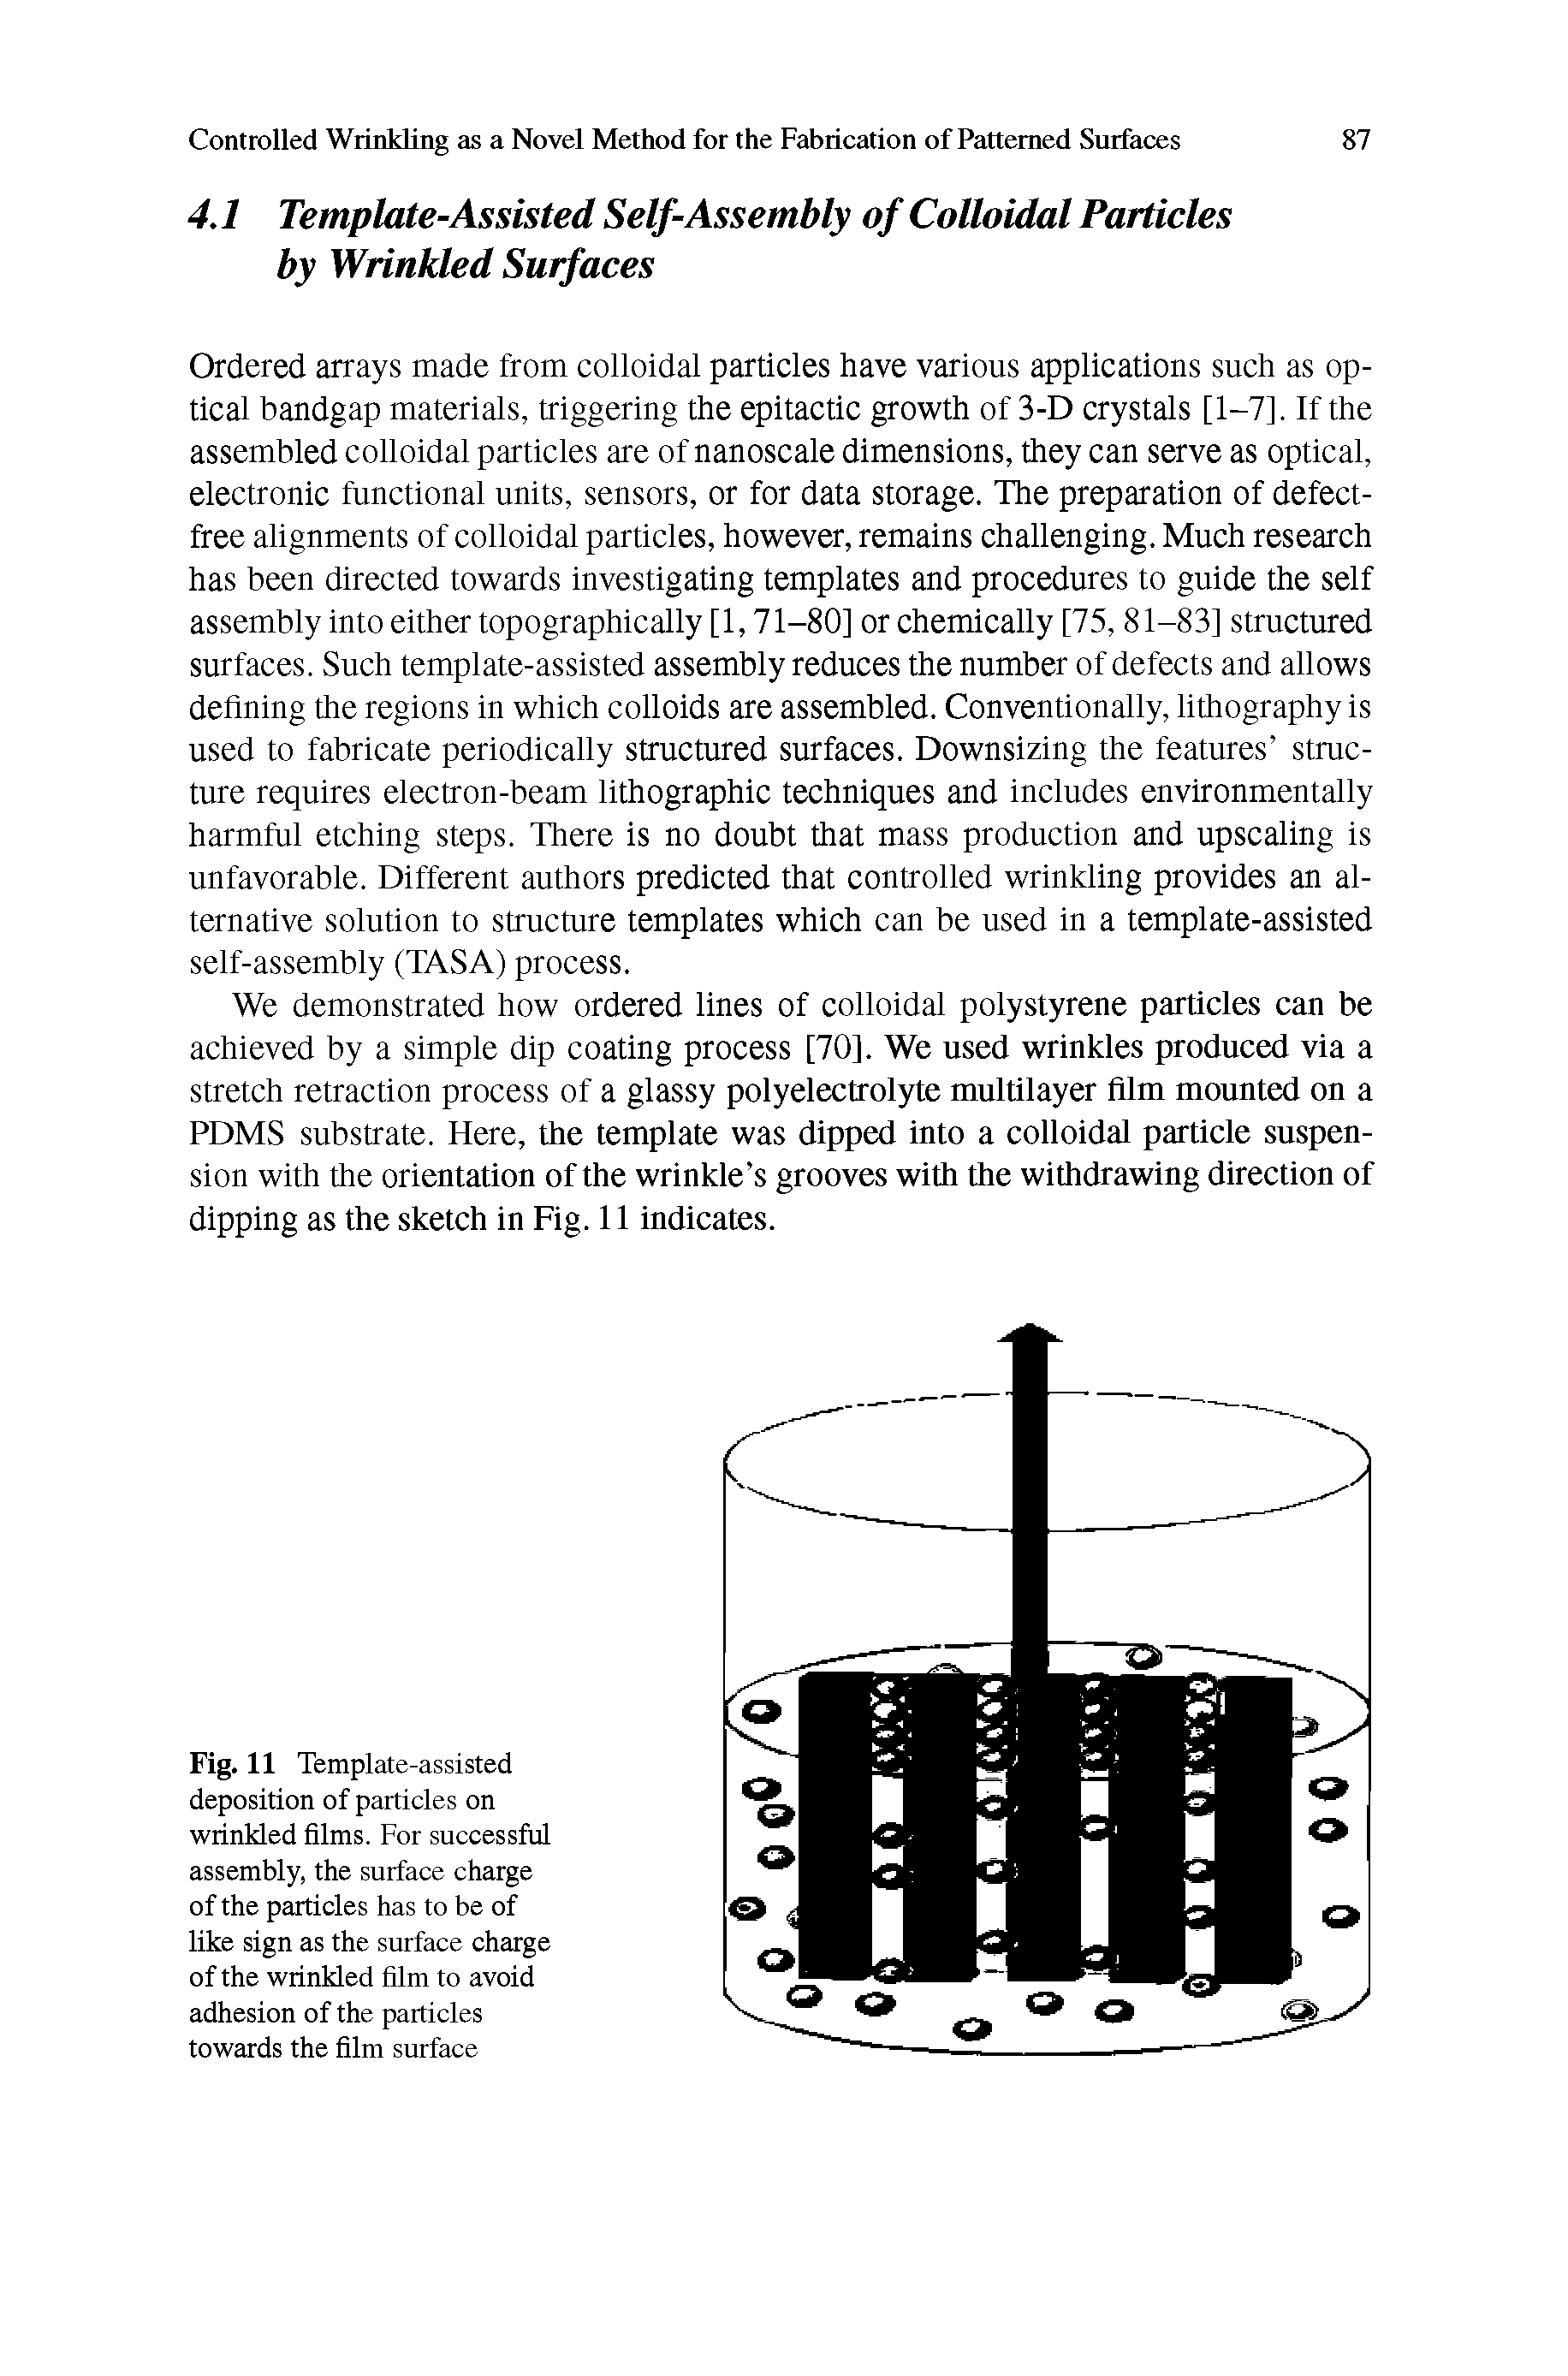 Fig. 11 Template-assisted deposition of particles on wrinkled films. For successful assembly, the surface charge of the particles has to be of like sign as the surface charge of the wrinkled film to avoid adhesion of the particles towards the film surface...